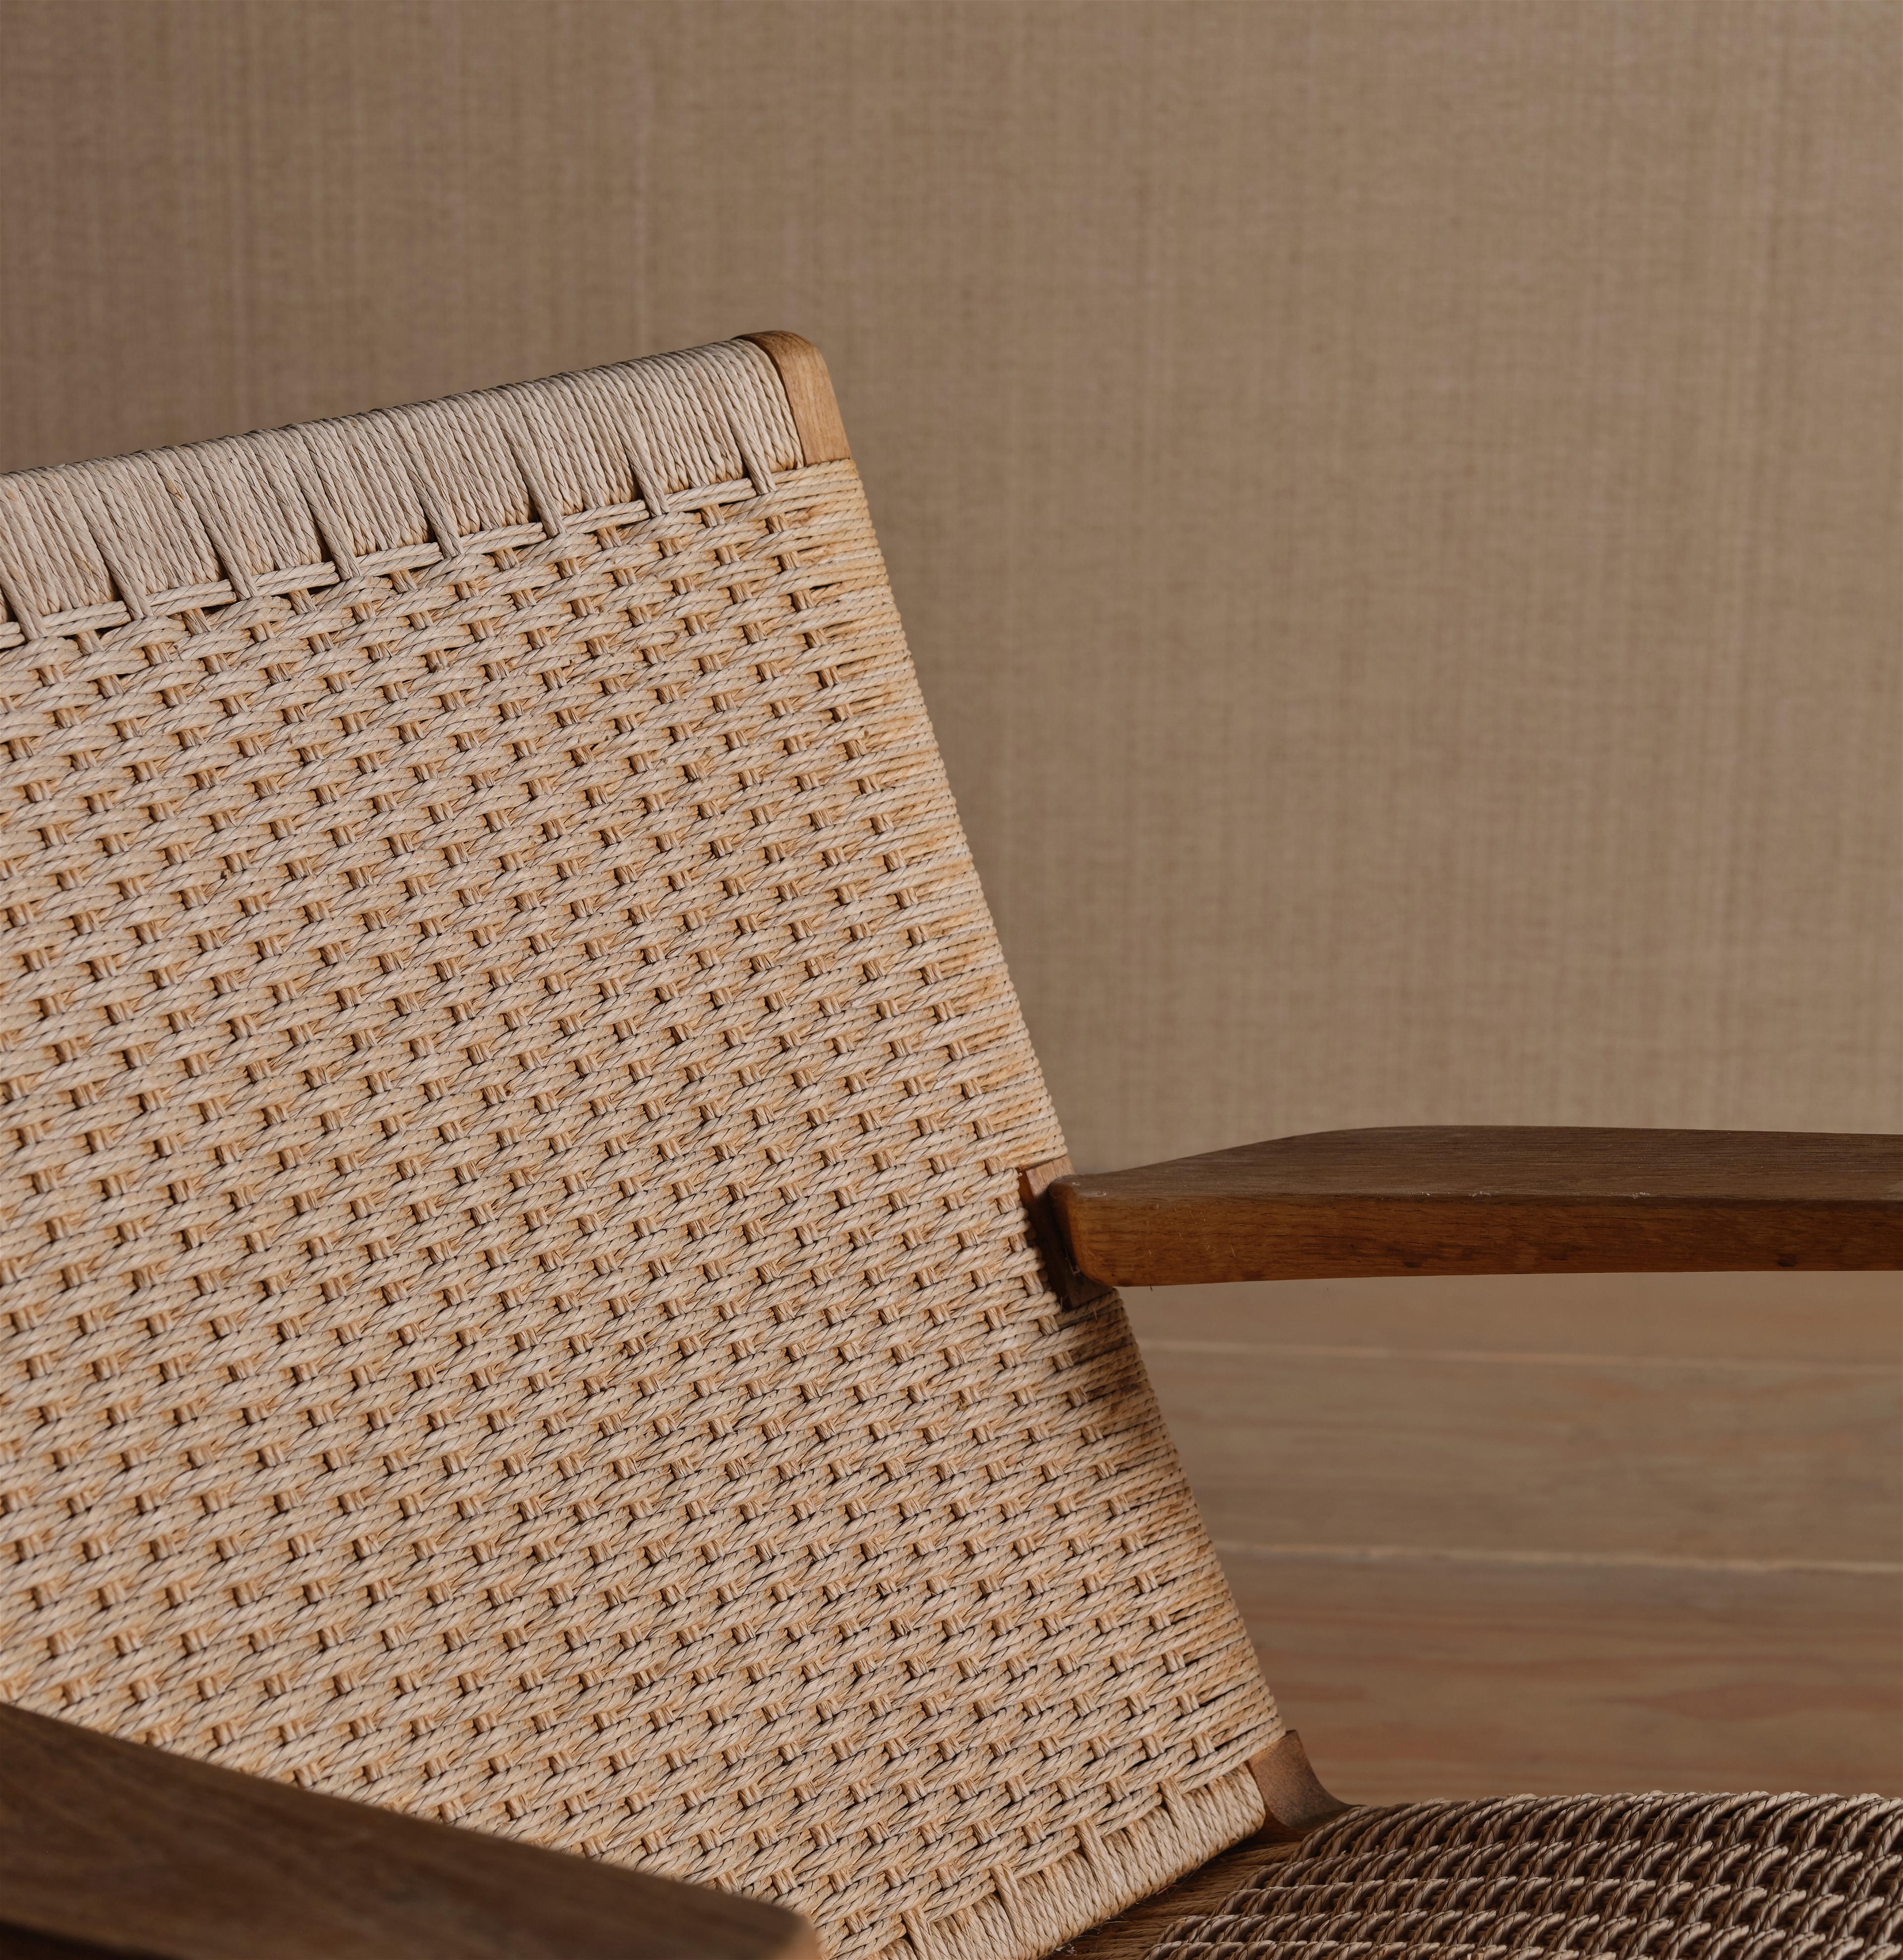 a close up of a chair with a wooden frame